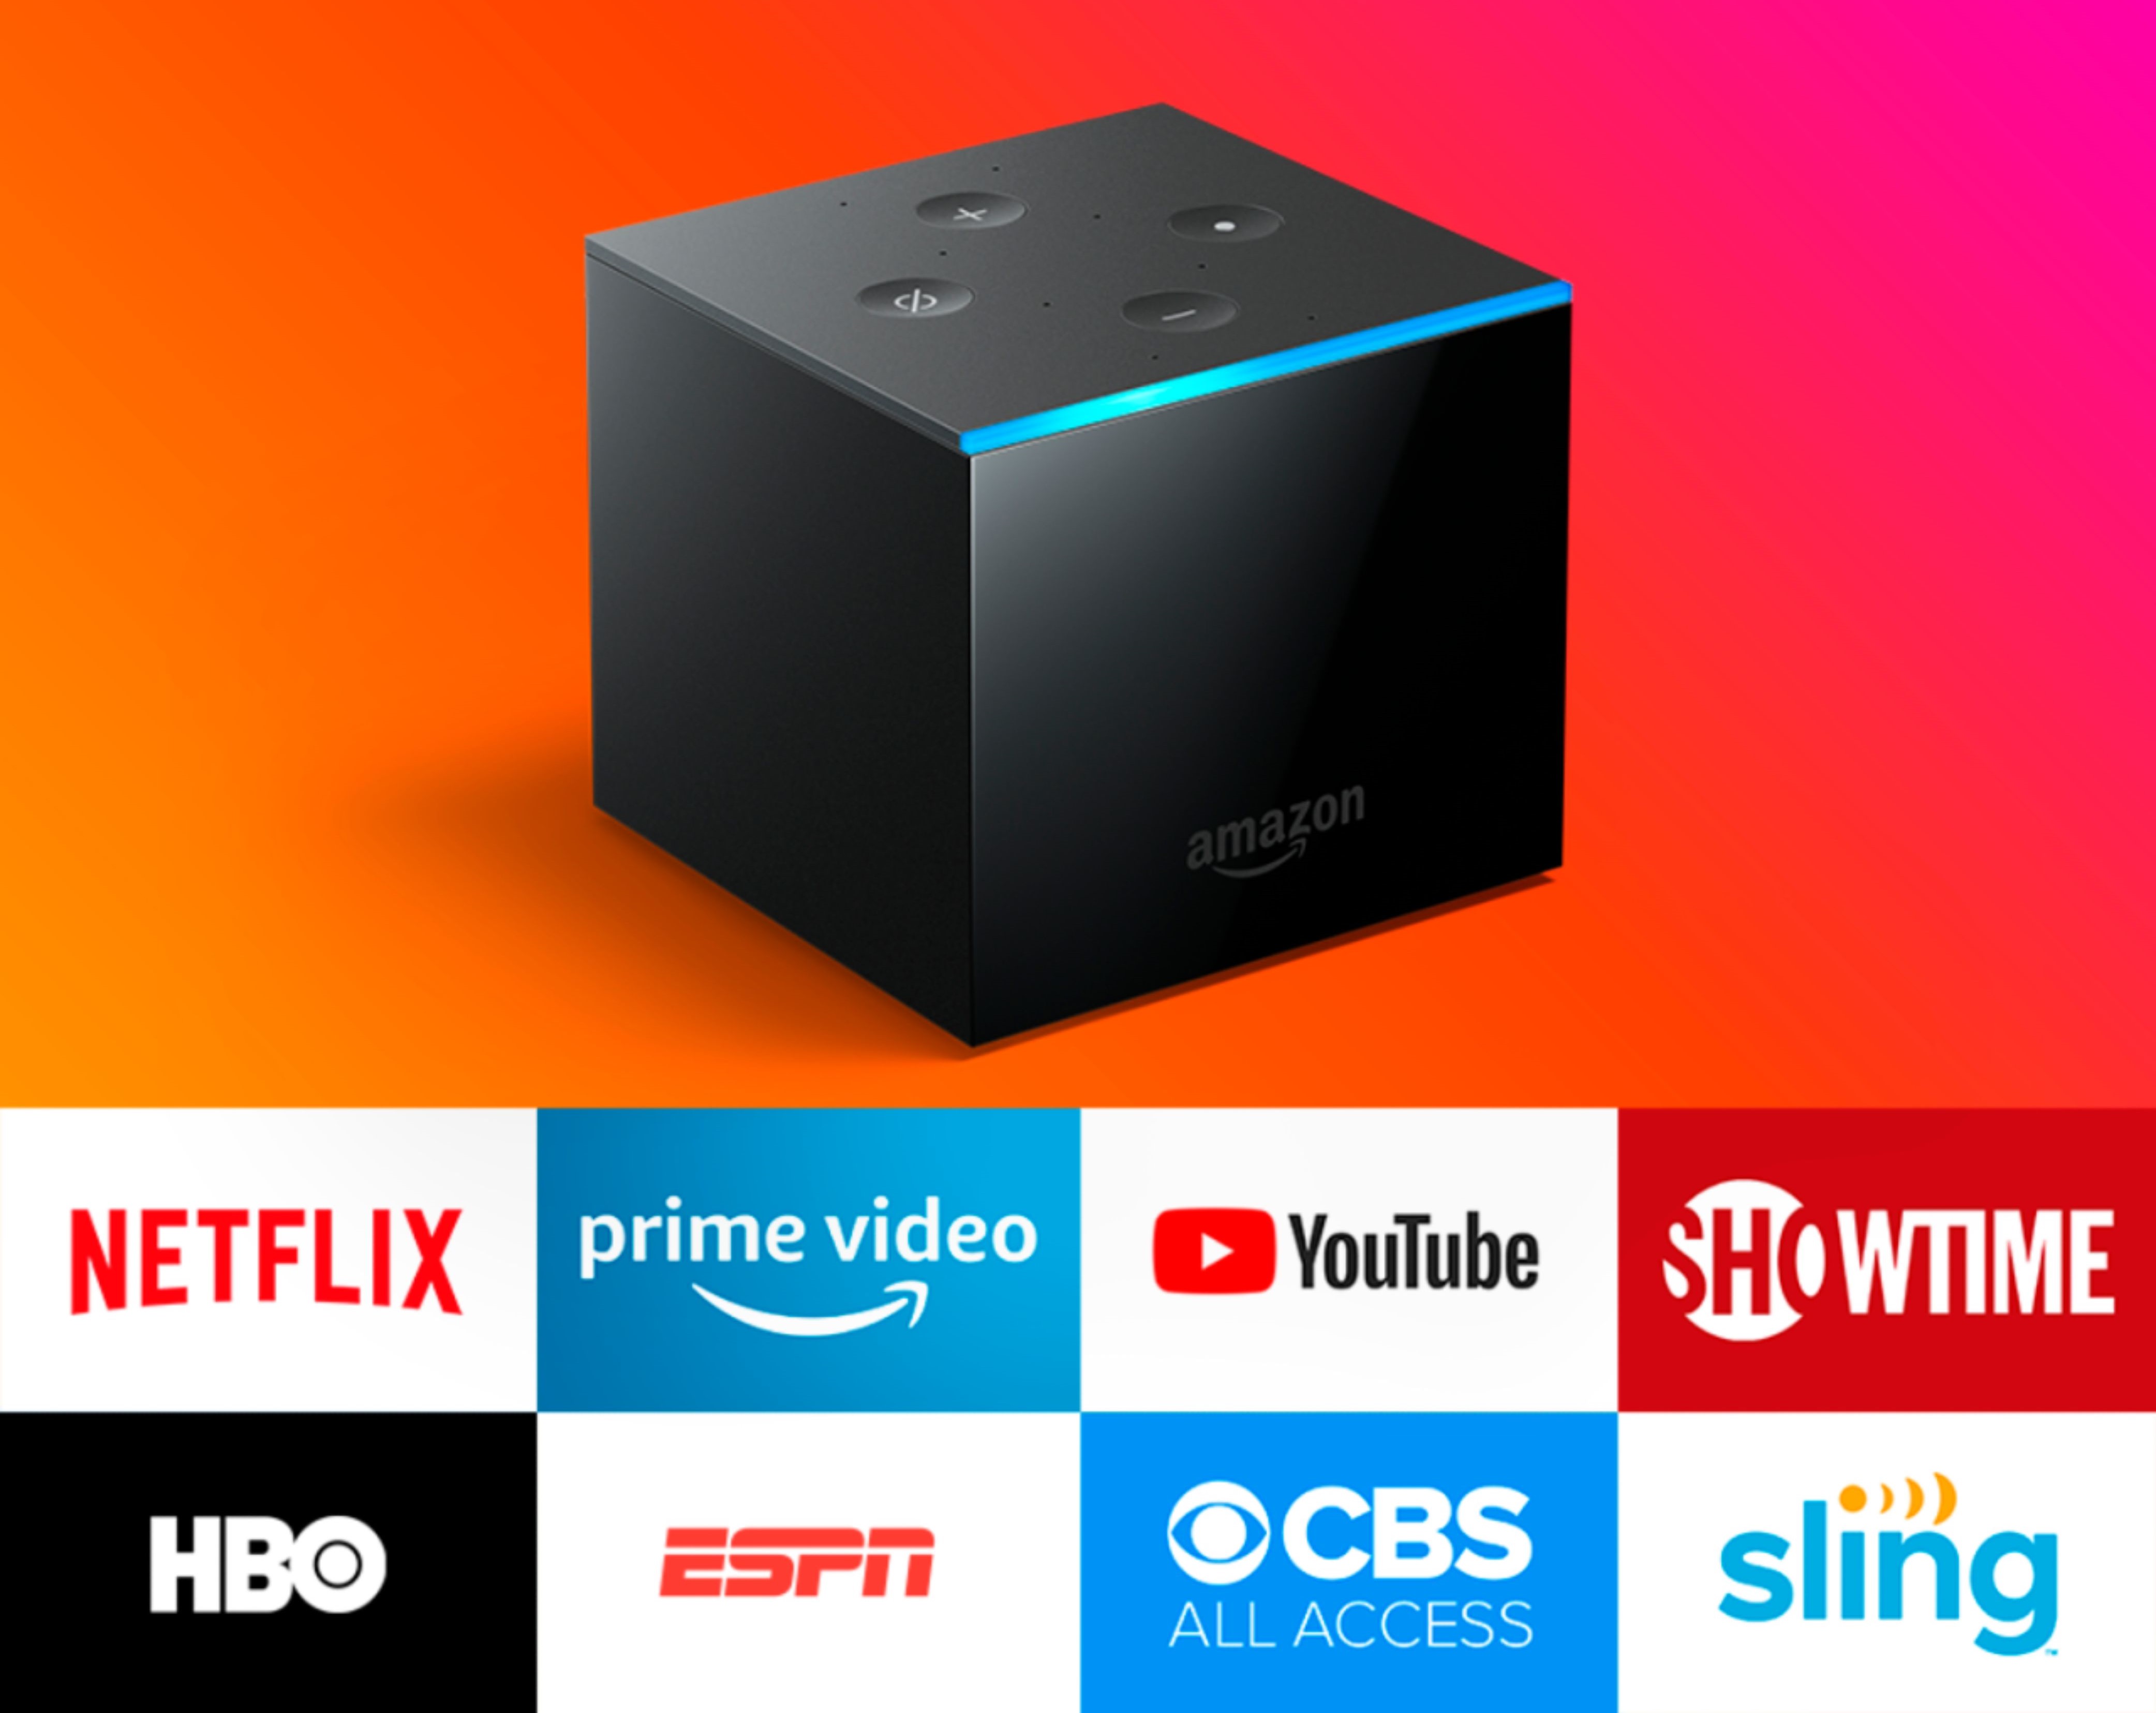 Amazon Fire TV Cube with list of services